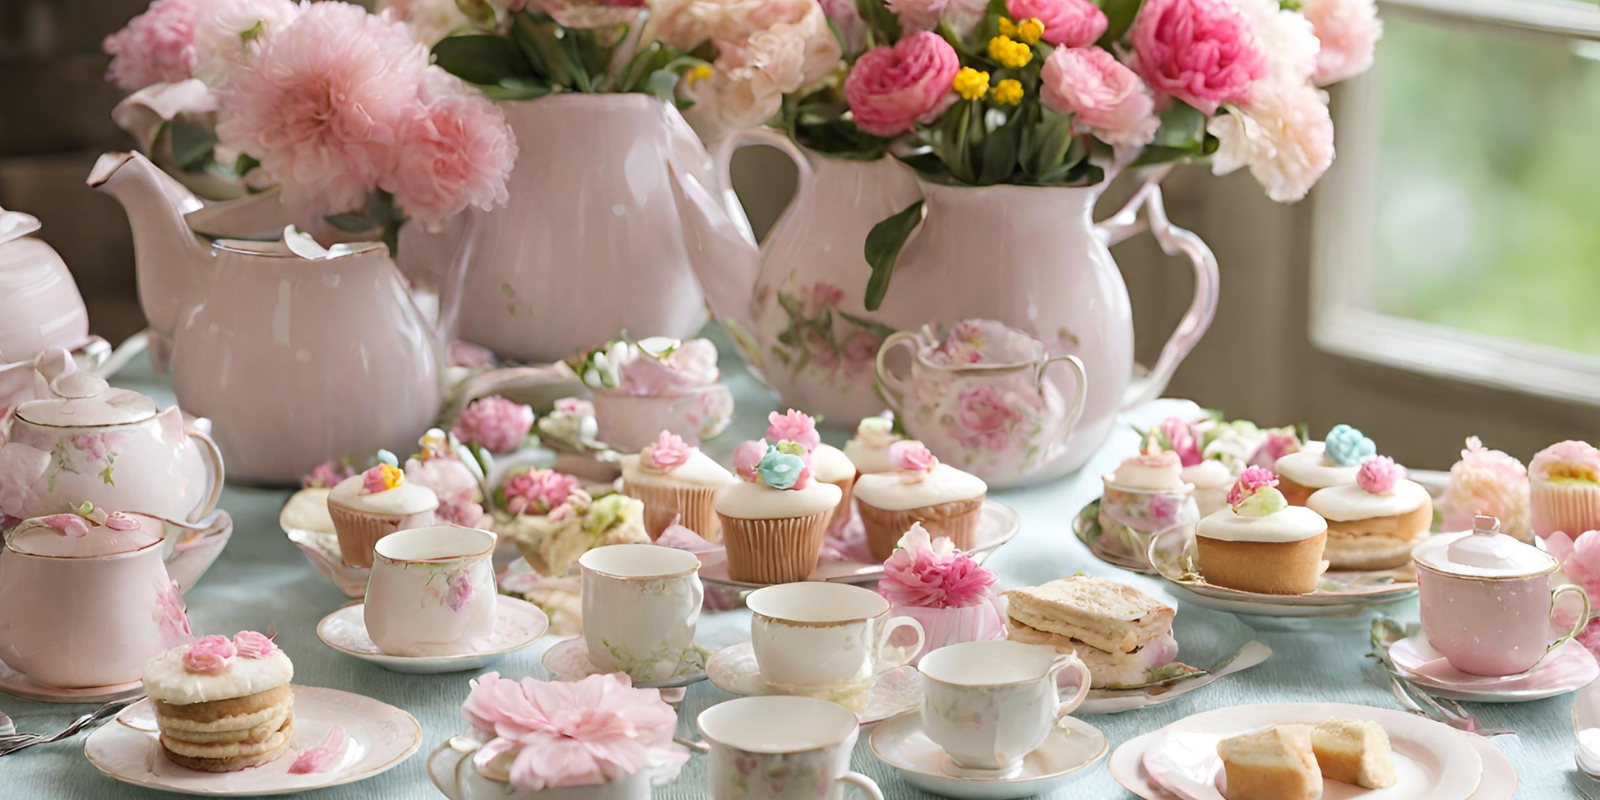 🌸✨ Celebrate Mother's Day with Us: Join Our Virtual Tea Party! ✨🌸